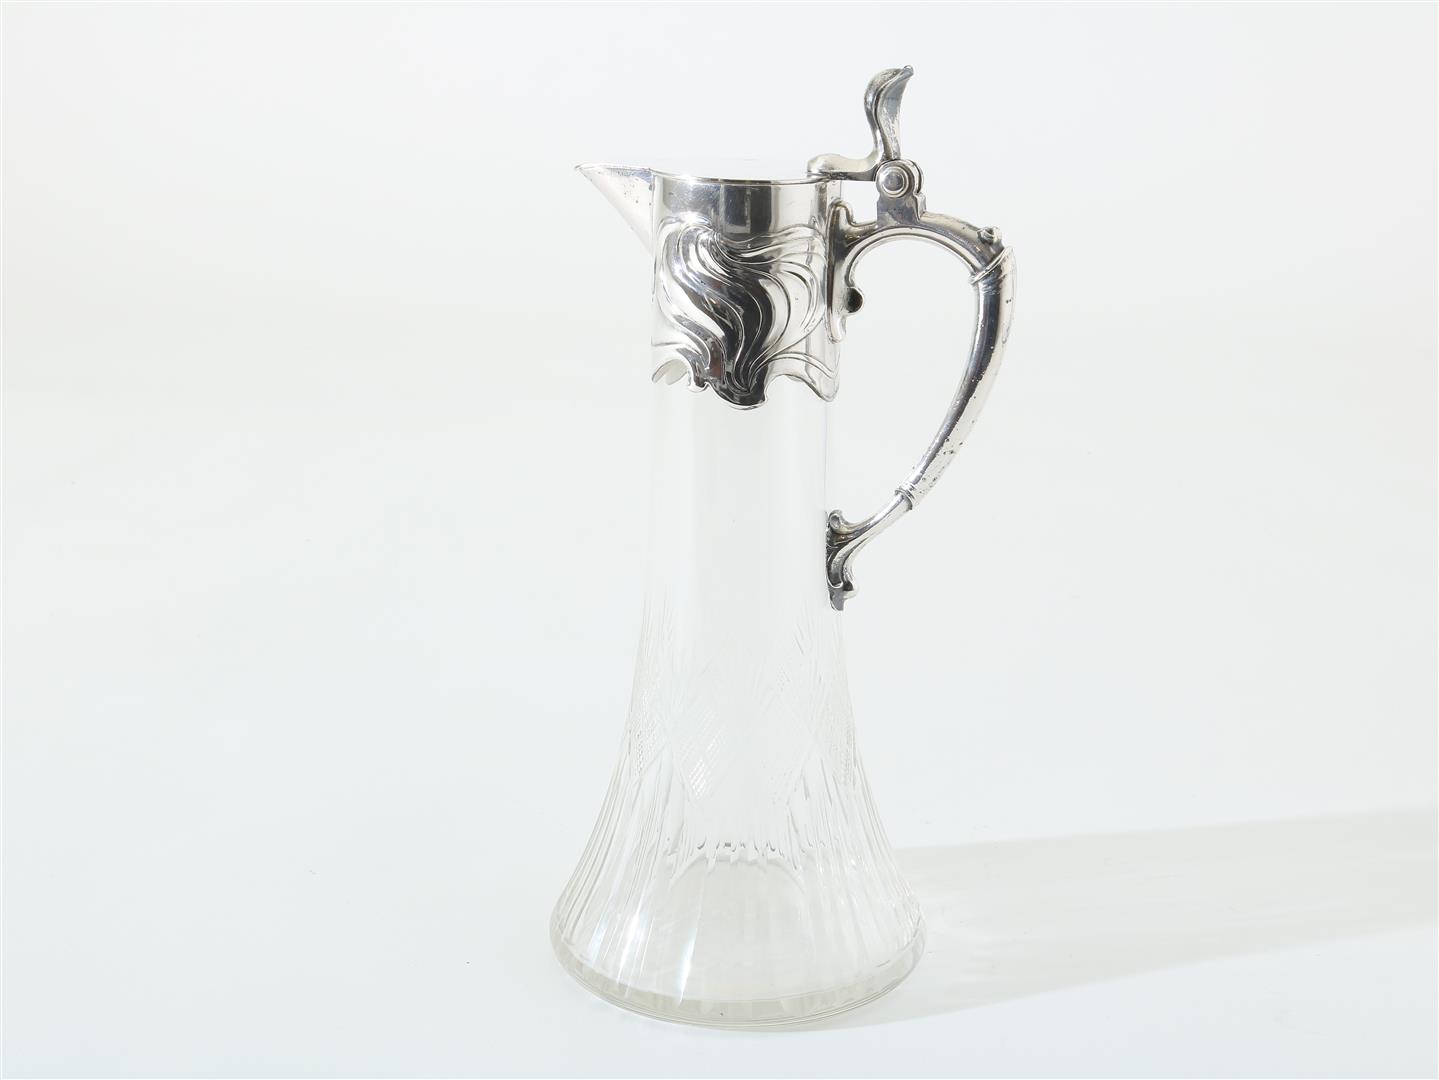 Crystal glass Art Nouveau decanter with silver-plated frame, WMF (Württembergische